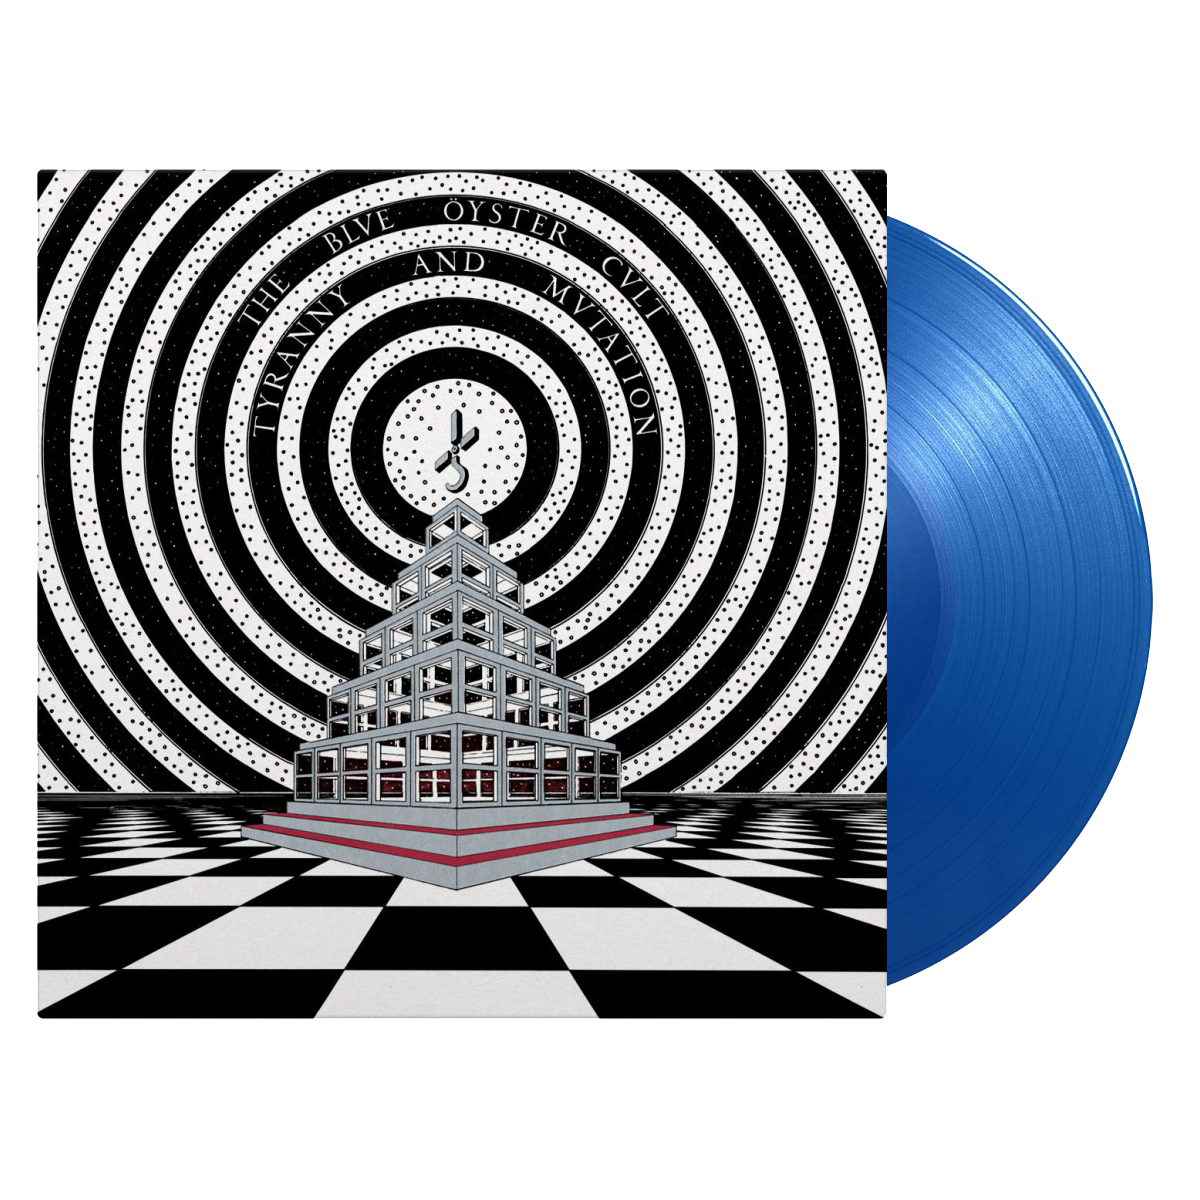 Blue Oyster Cult - Tyranny and Mutation: 50th Anniversary Limited Edition Translucent Blue Vinyl LP